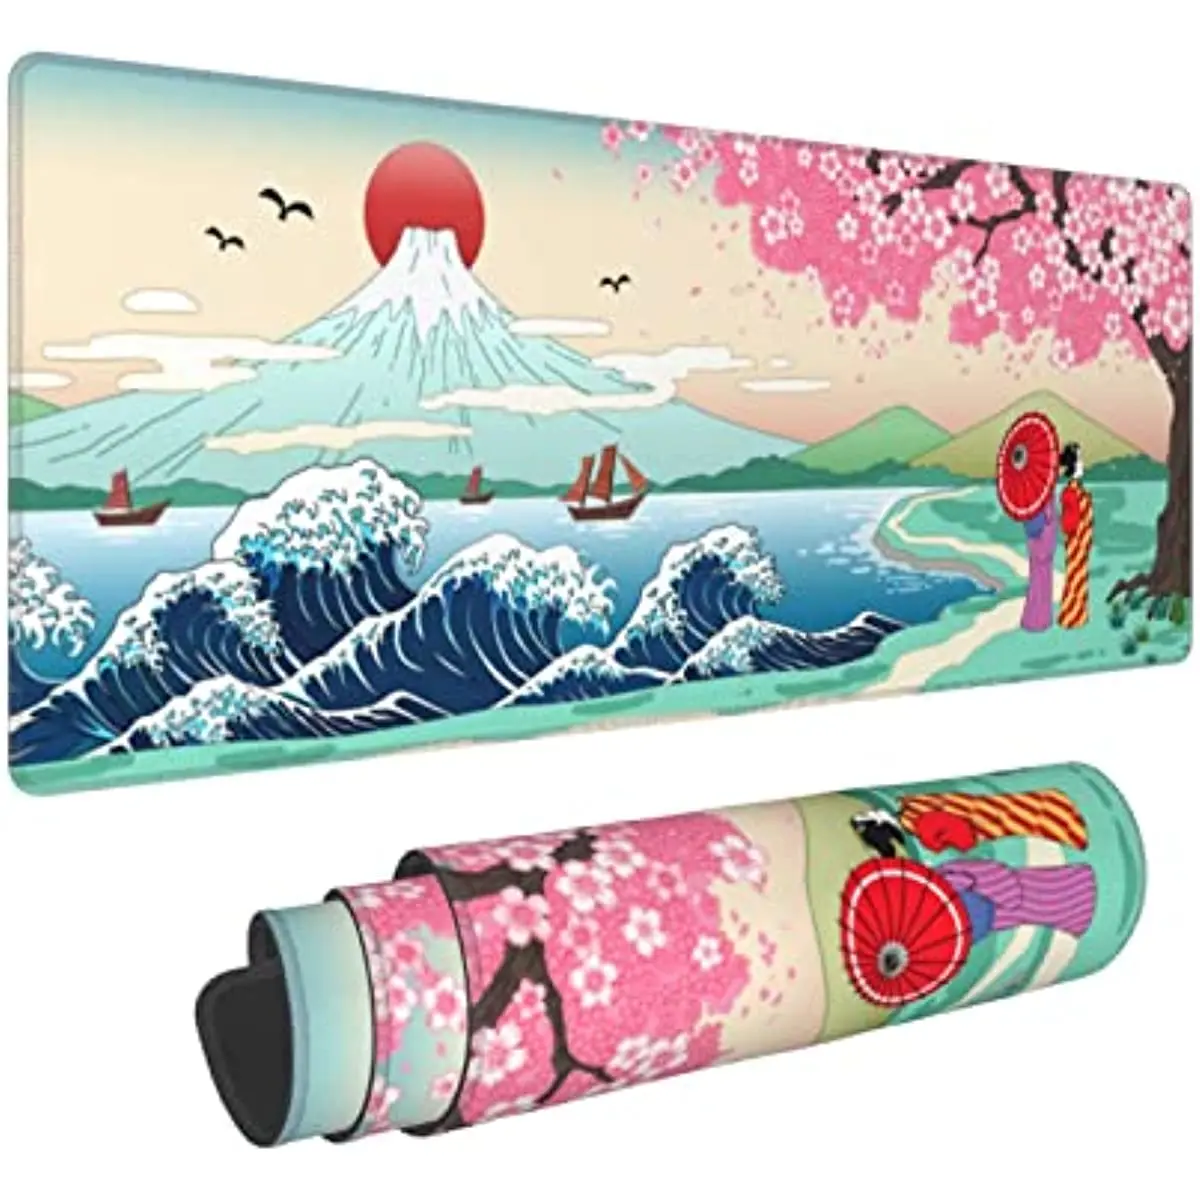 Japanese Wave Cherry Blossom Gaming Mouse Pad XL Large Non Slip Rubber Mousepad Stitched Edges Desk Pad 31.5X11.8